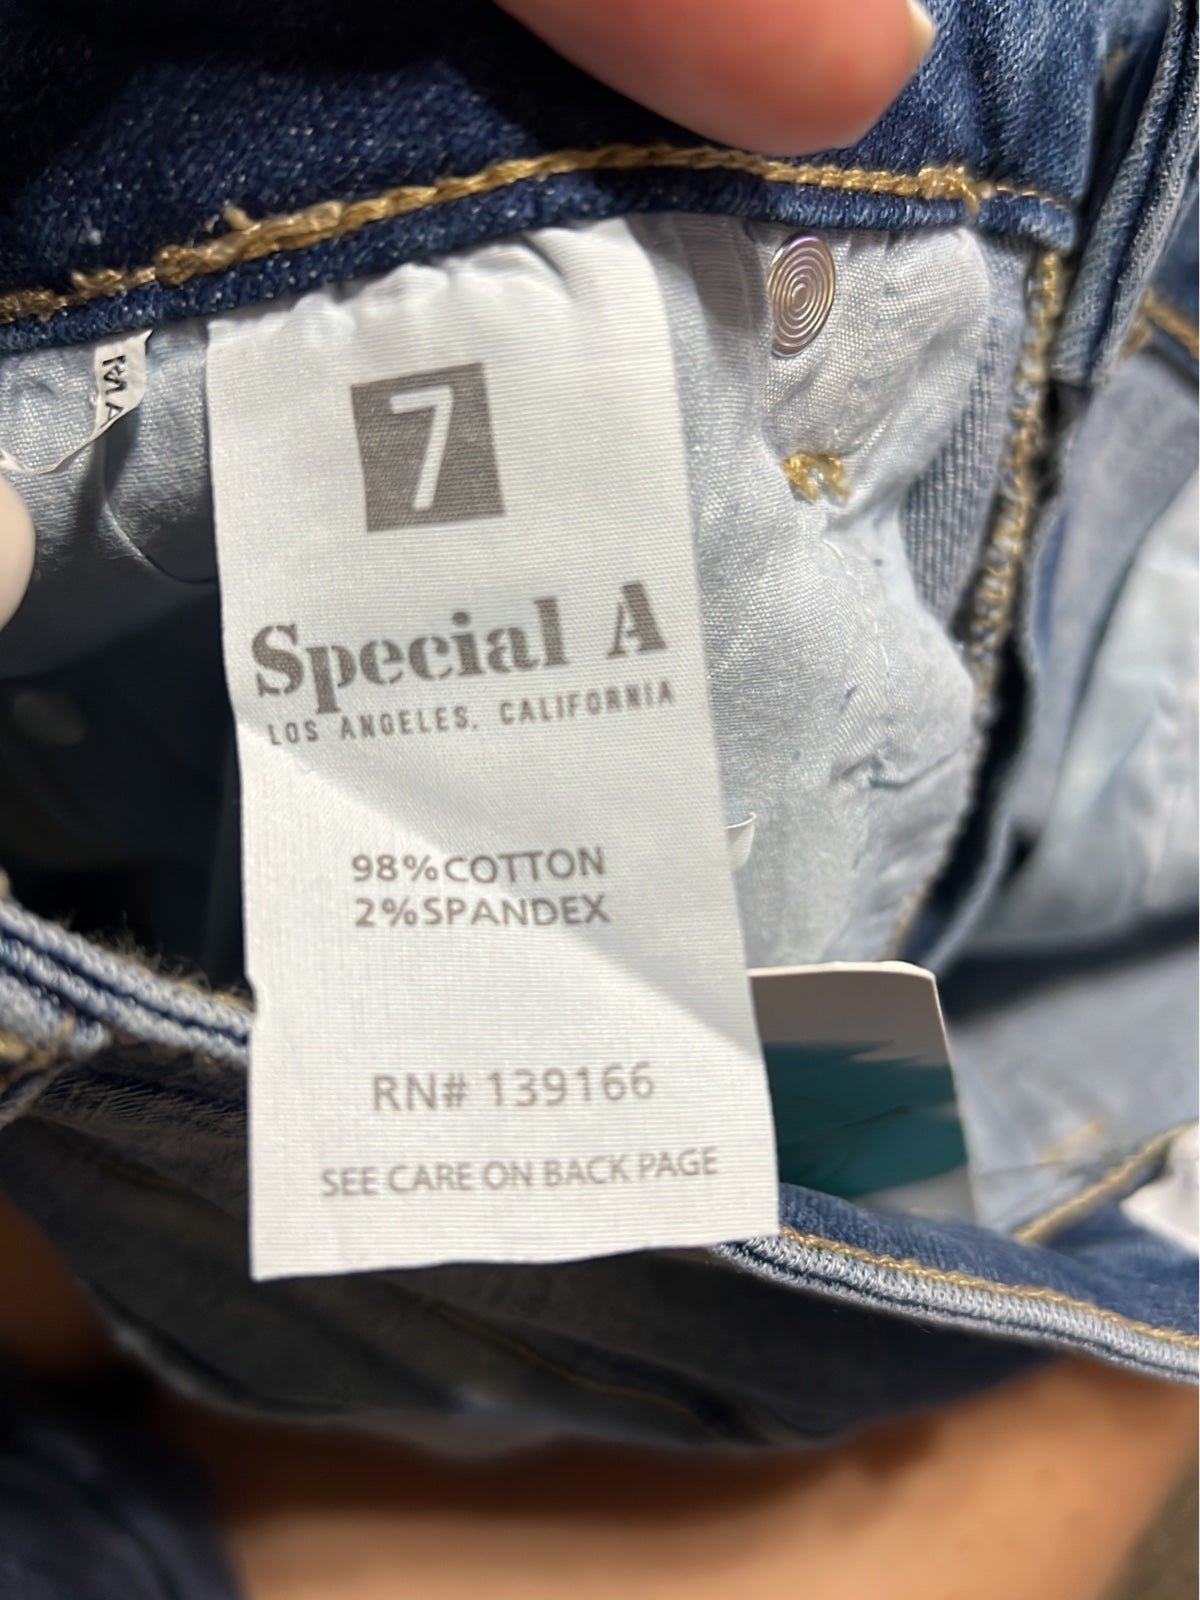 Latest  NWT Special A jeans size 7 hf9DPcQal Counter Genuine 